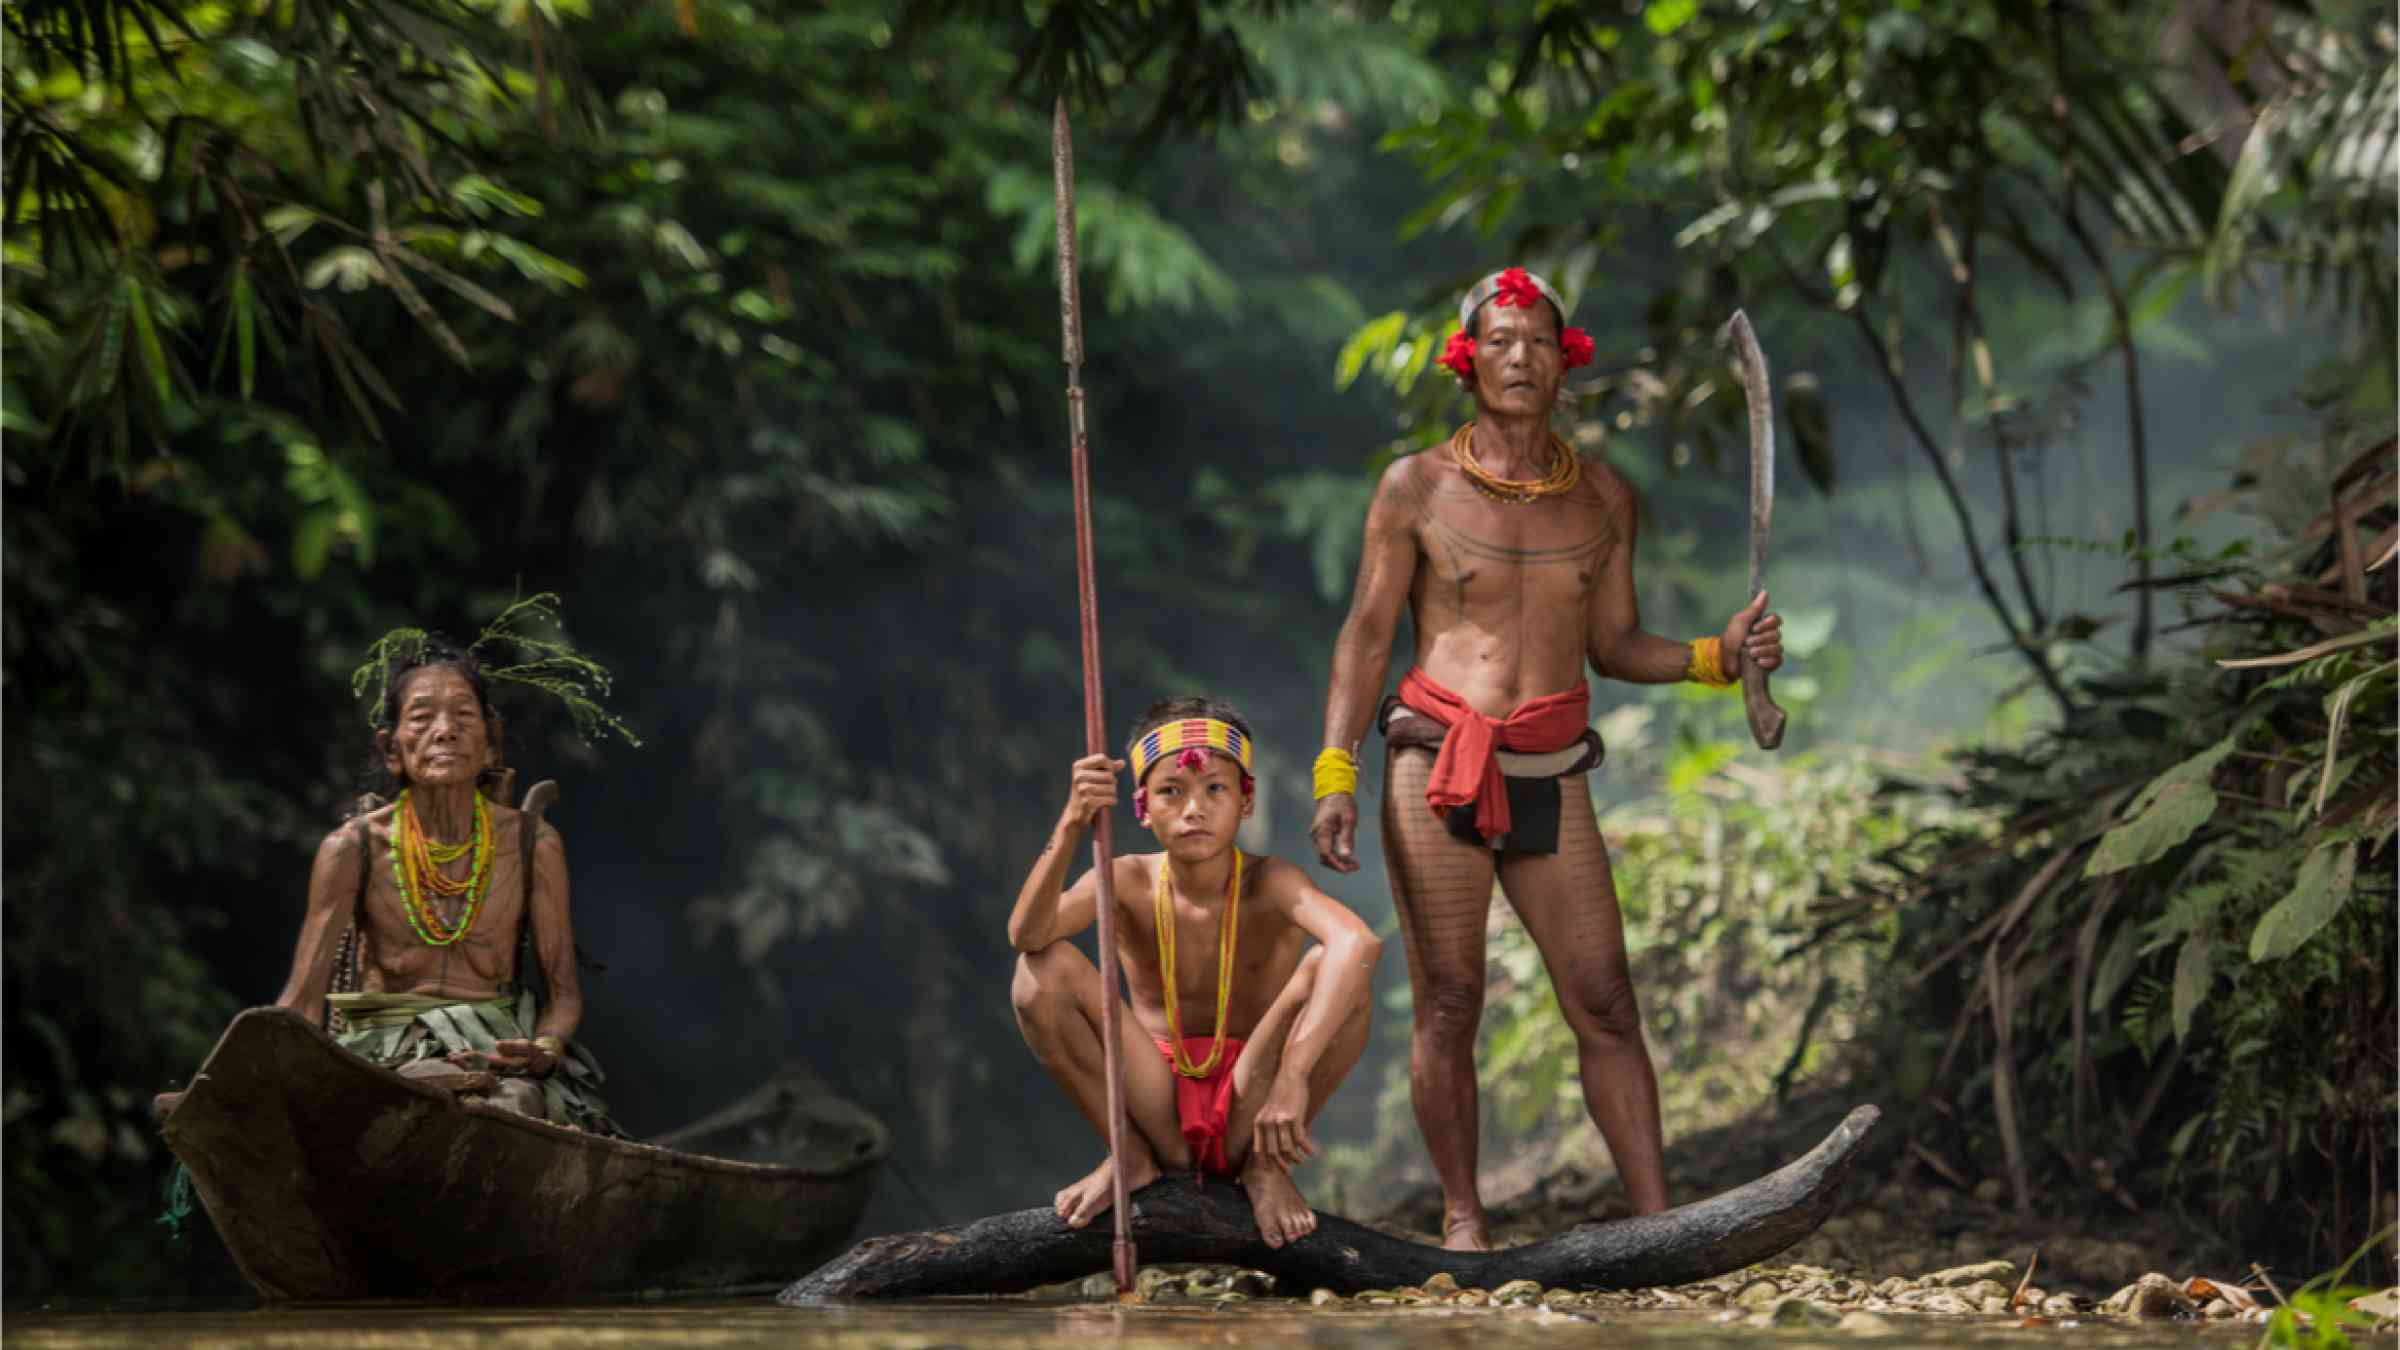 The indigenous inhabitants of the islands in Muara Siberut are also known as the Mentawai population. West Sumatra, Siberut Island, Indonesia.